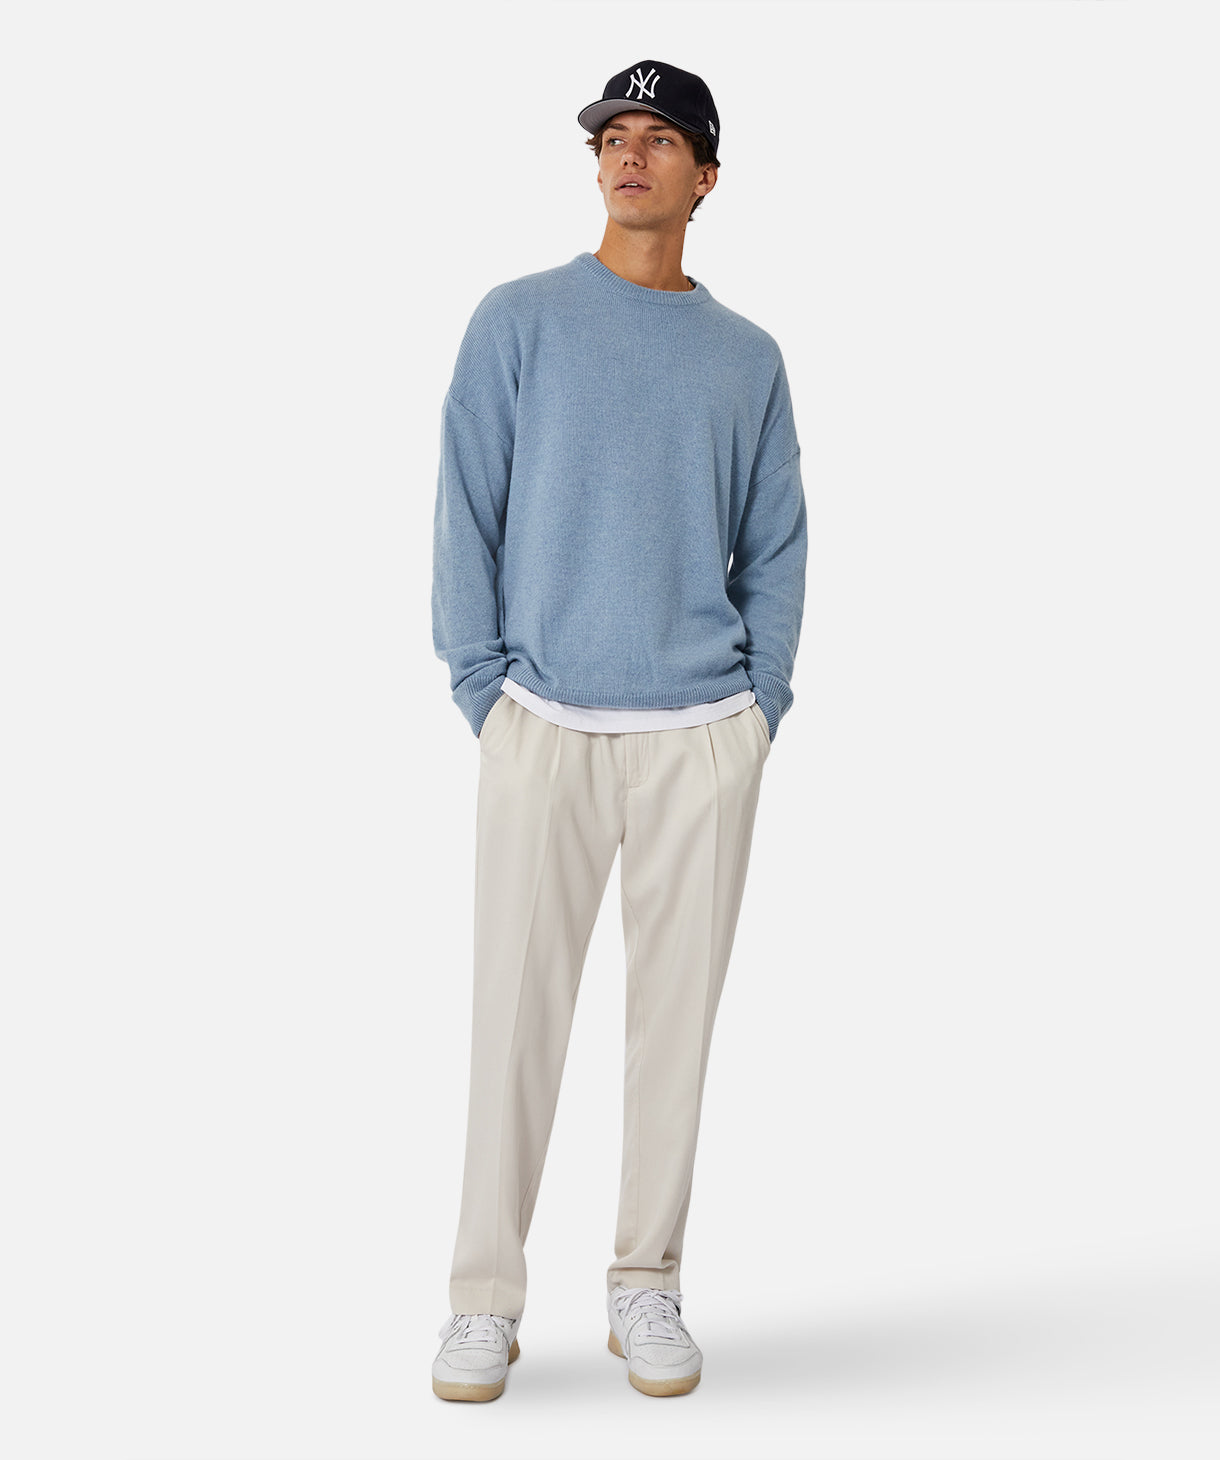 Shop The Stoningston Knit in Blue | Industrie Clothing – Industrie ...